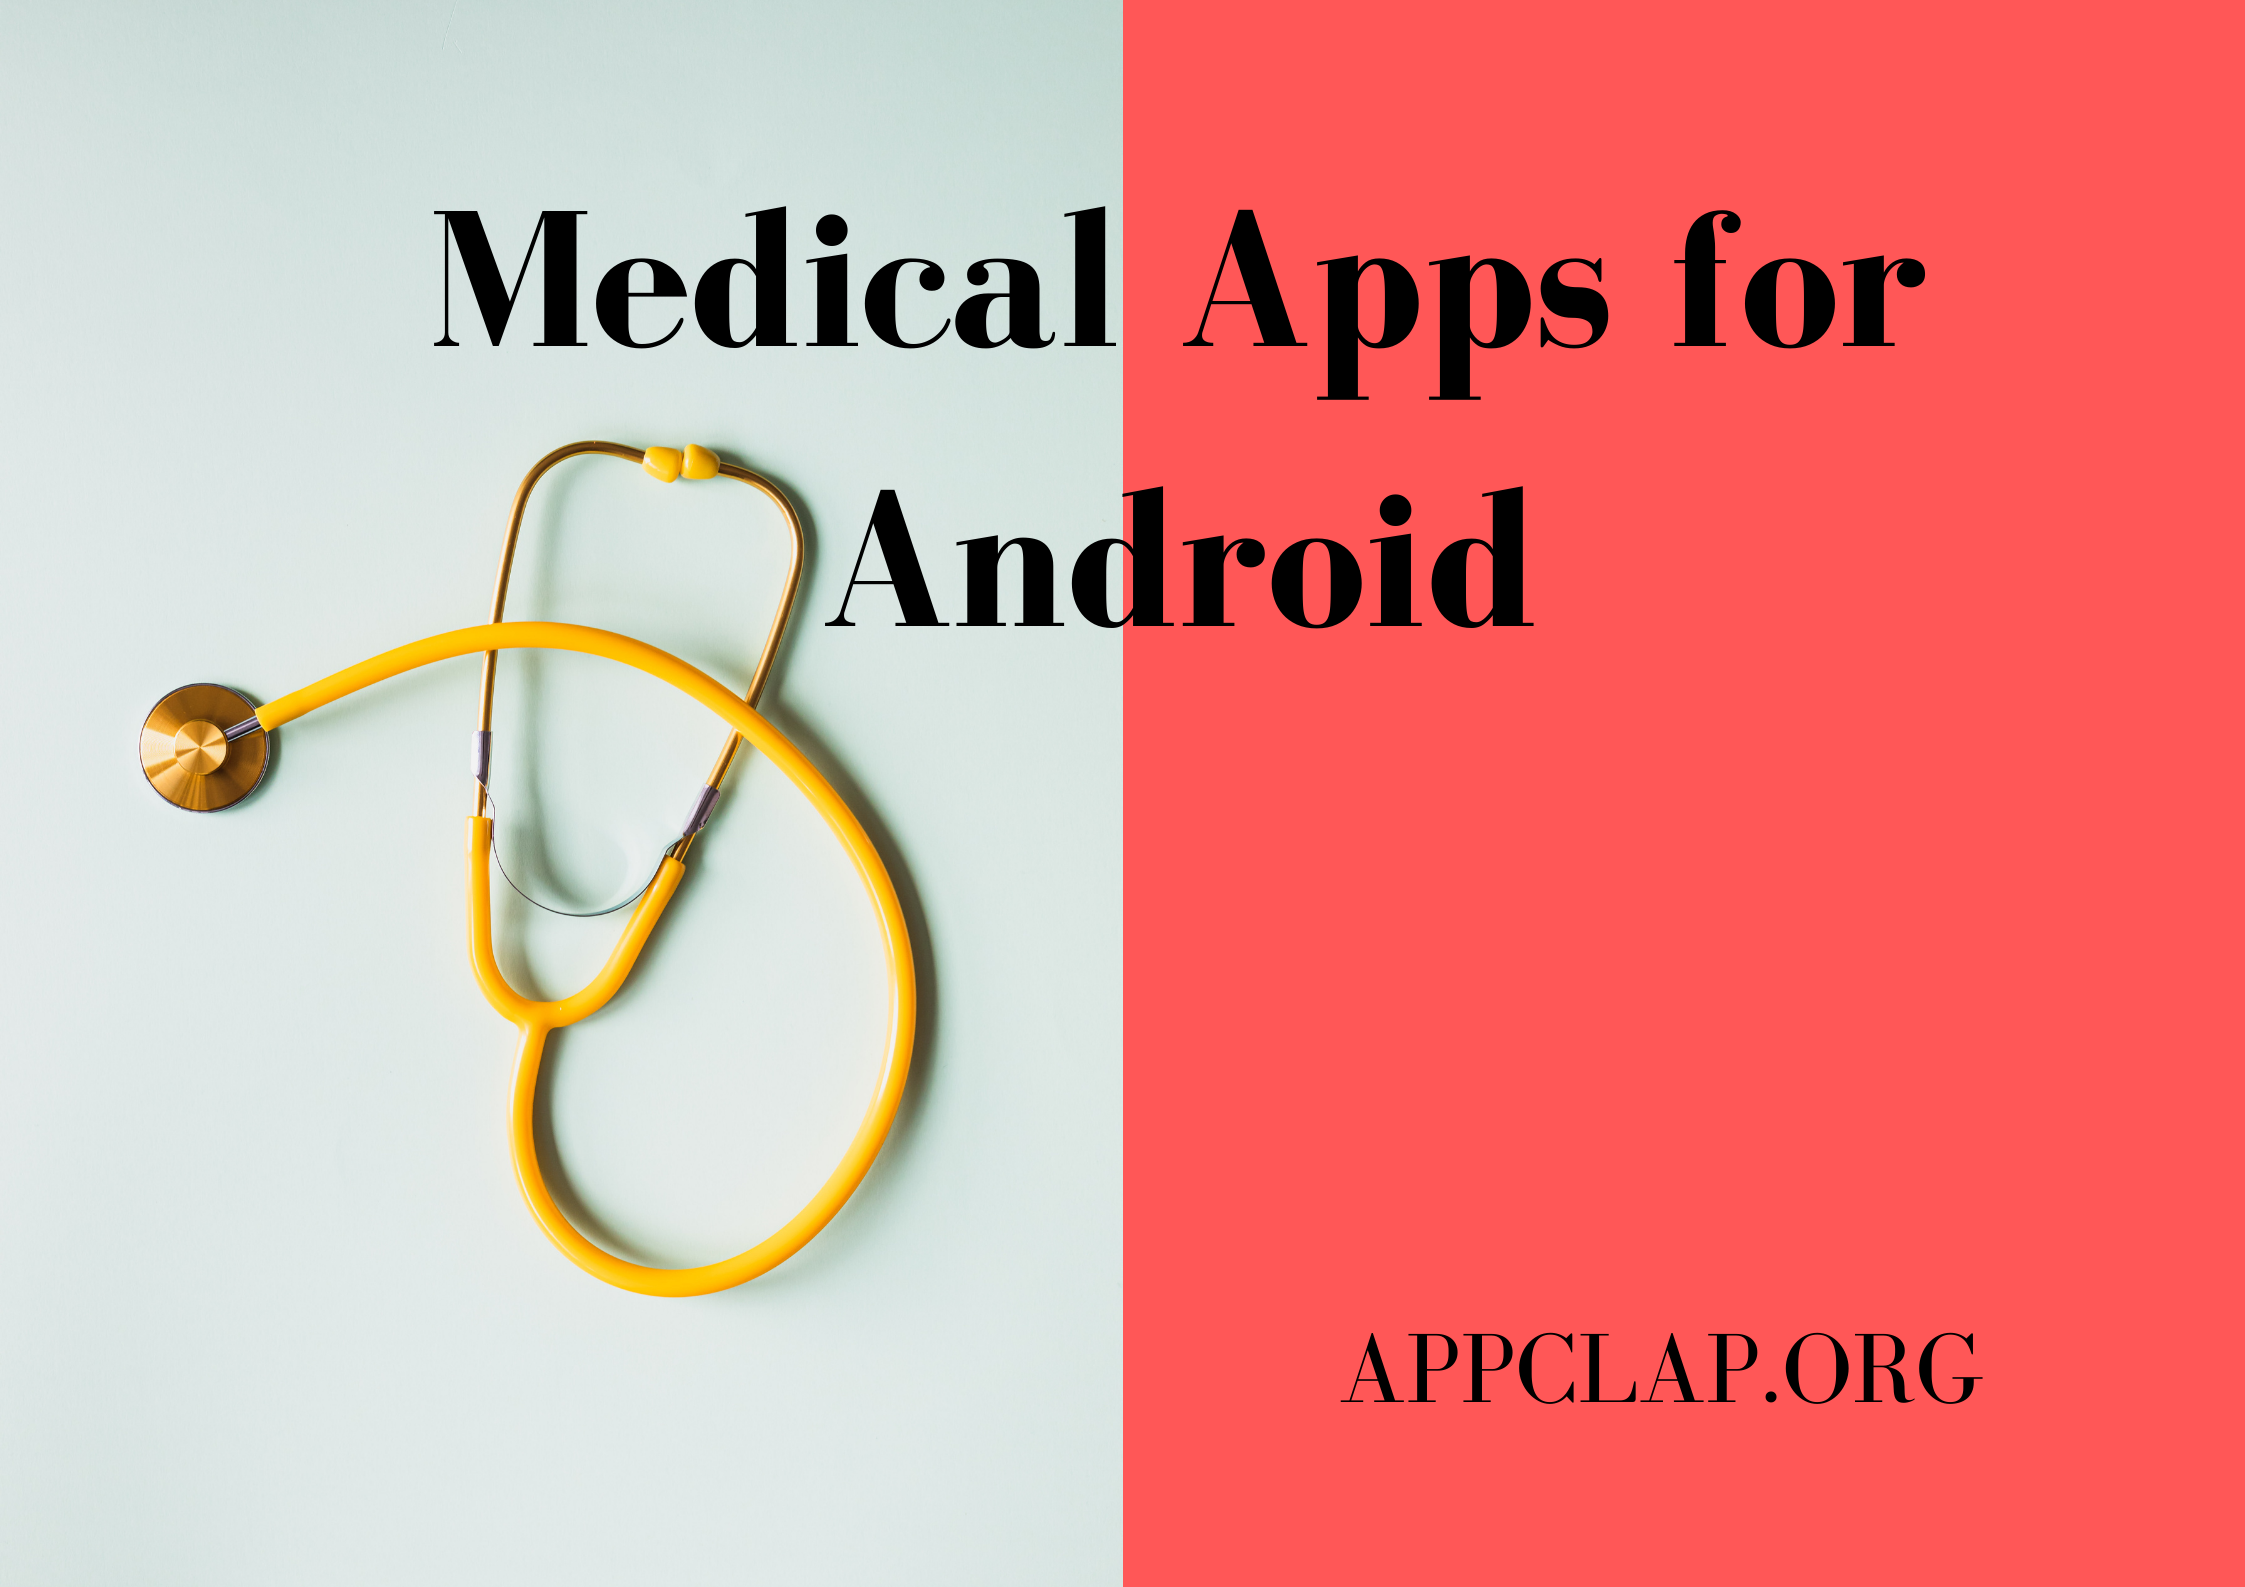 Medical Apps for Android